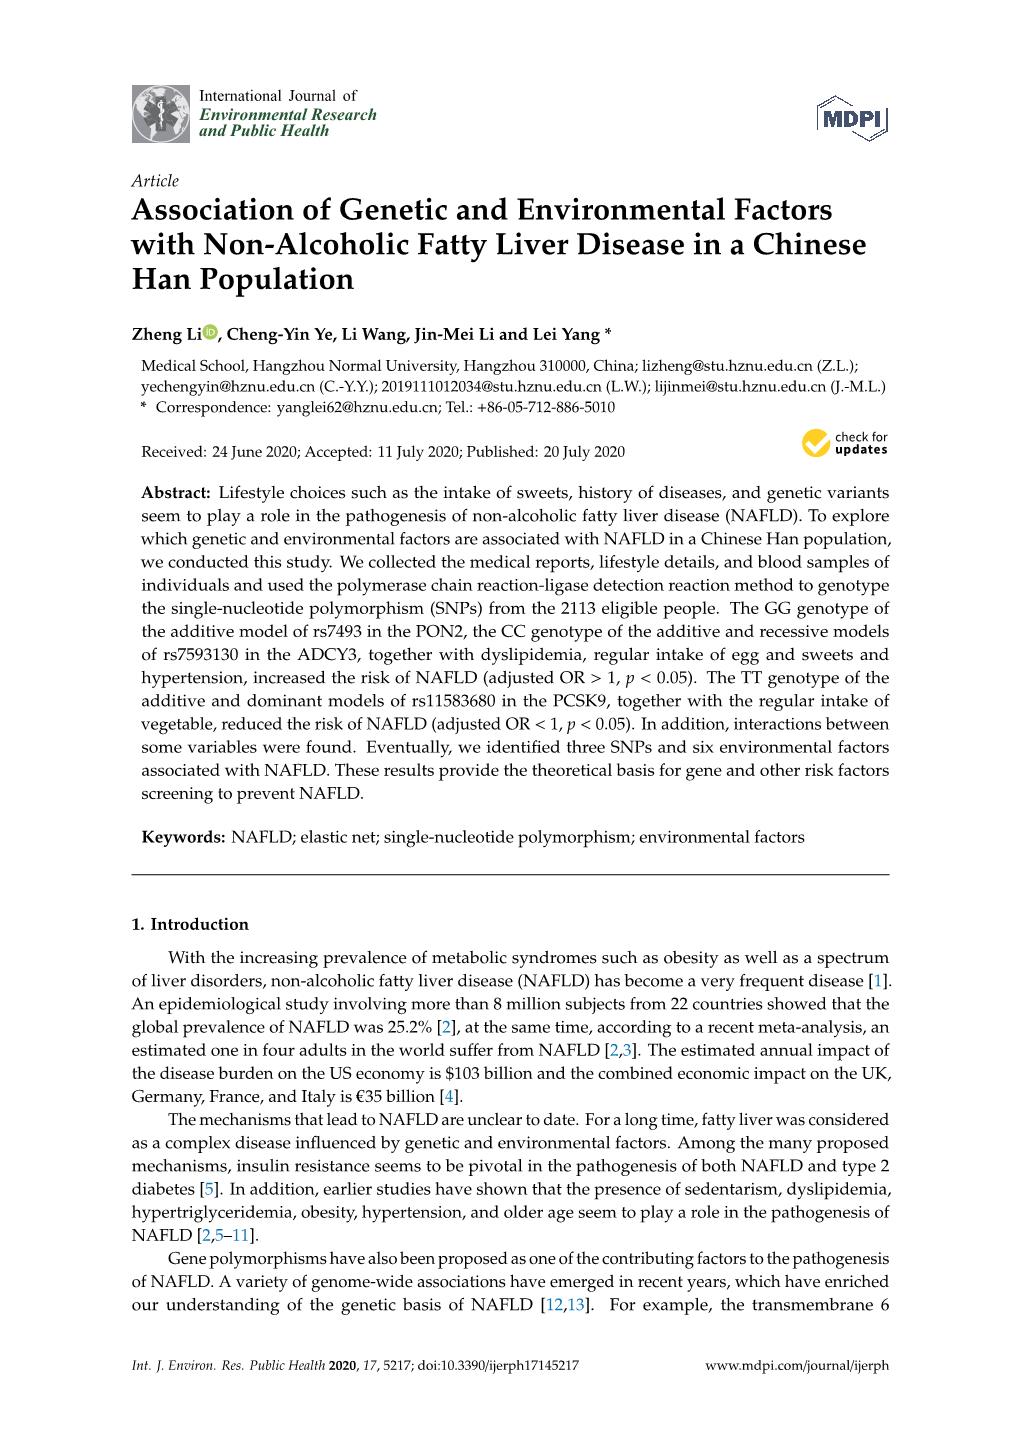 Association of Genetic and Environmental Factors with Non-Alcoholic Fatty Liver Disease in a Chinese Han Population